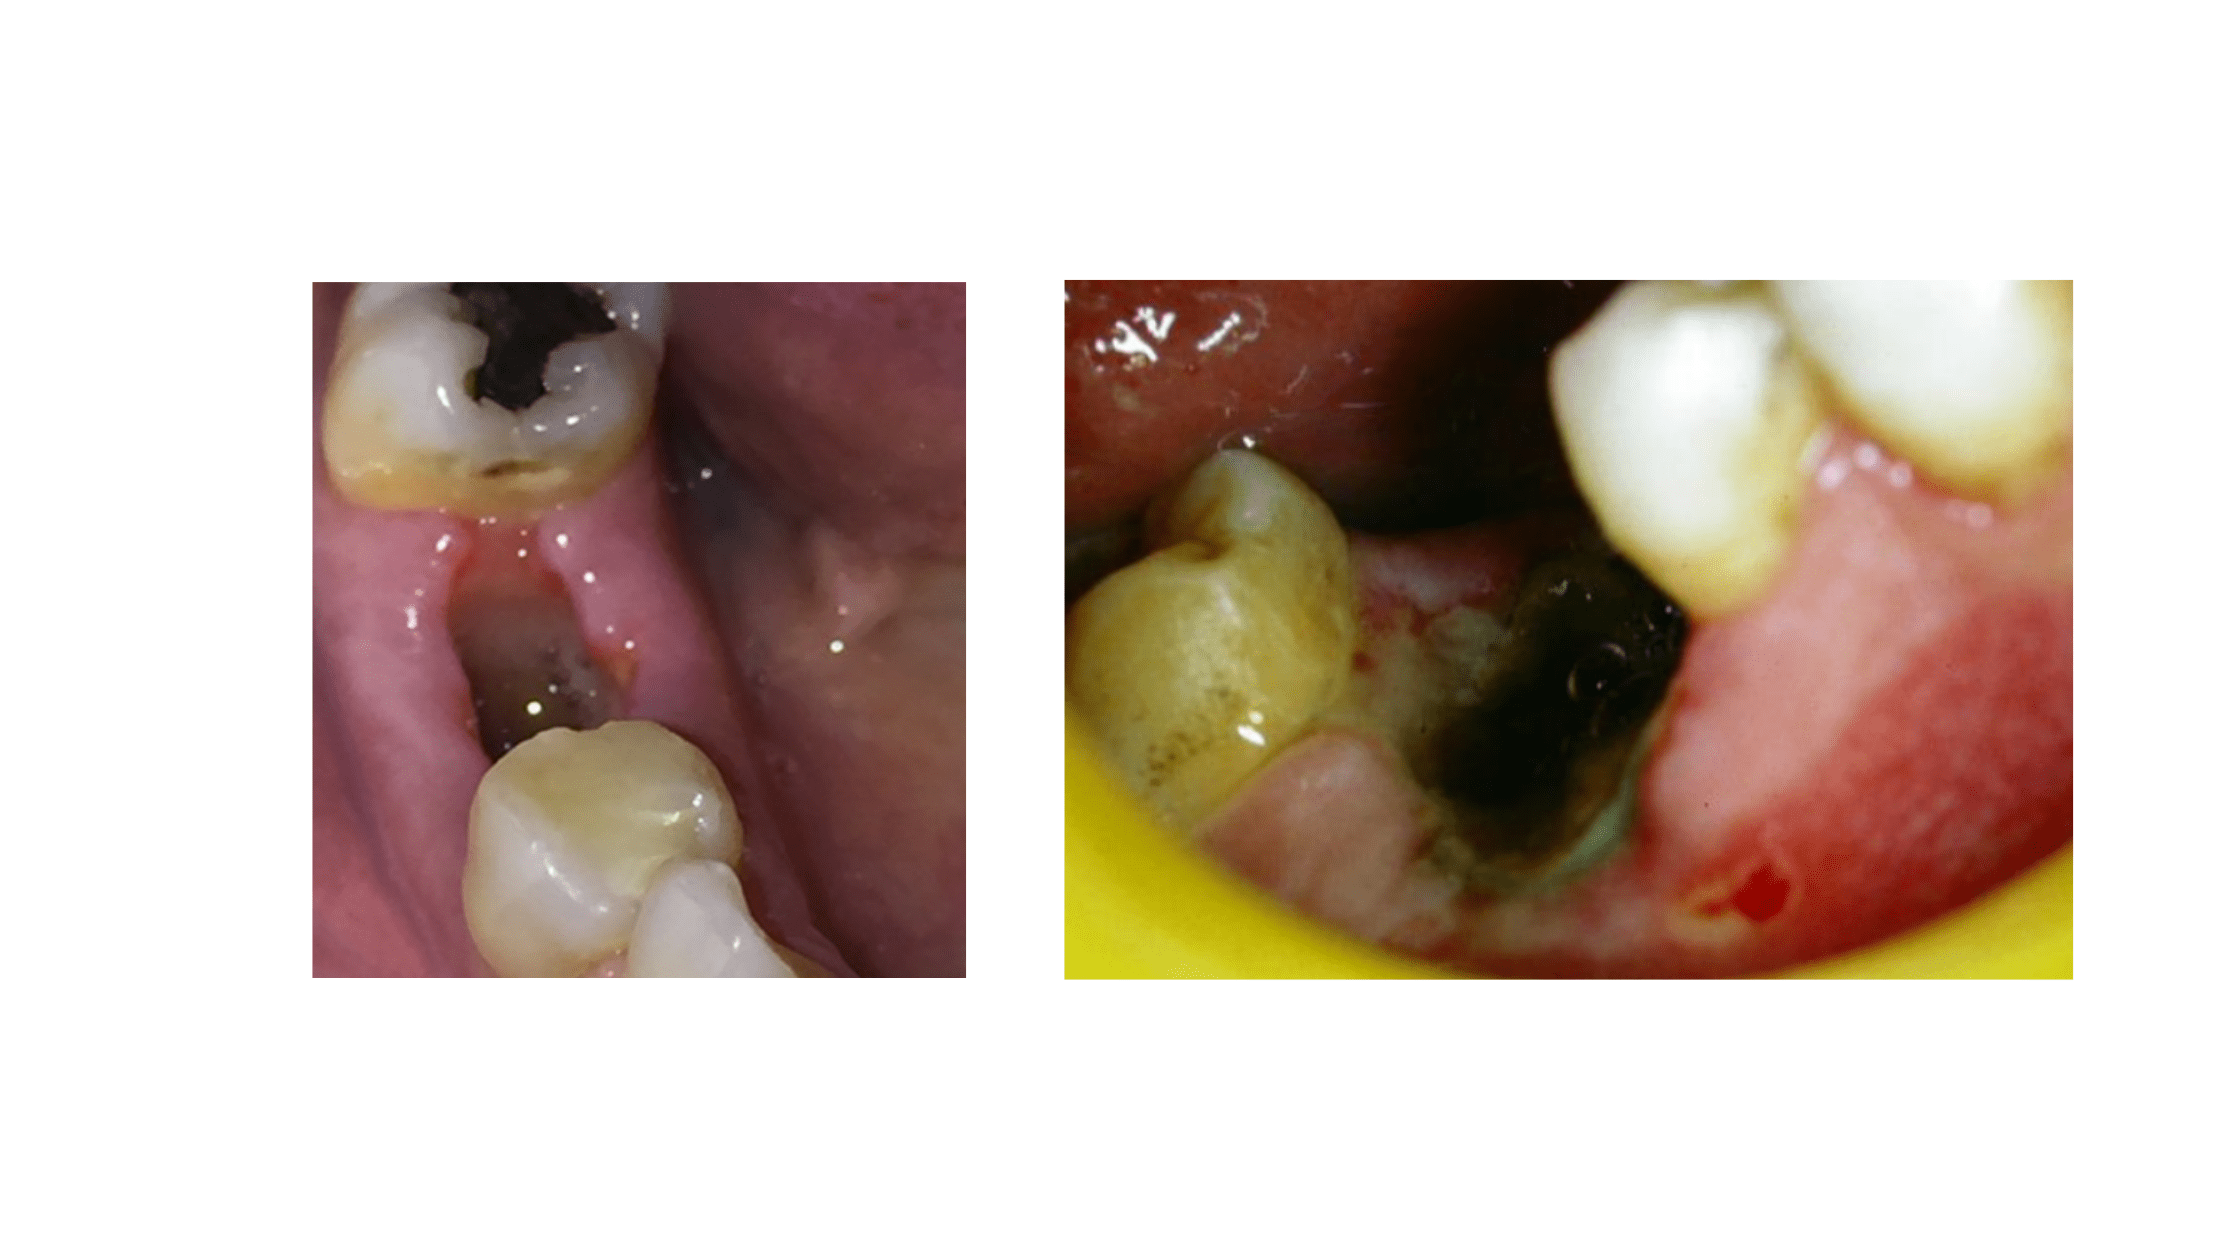 dry socket after tooth extraction: clinical images